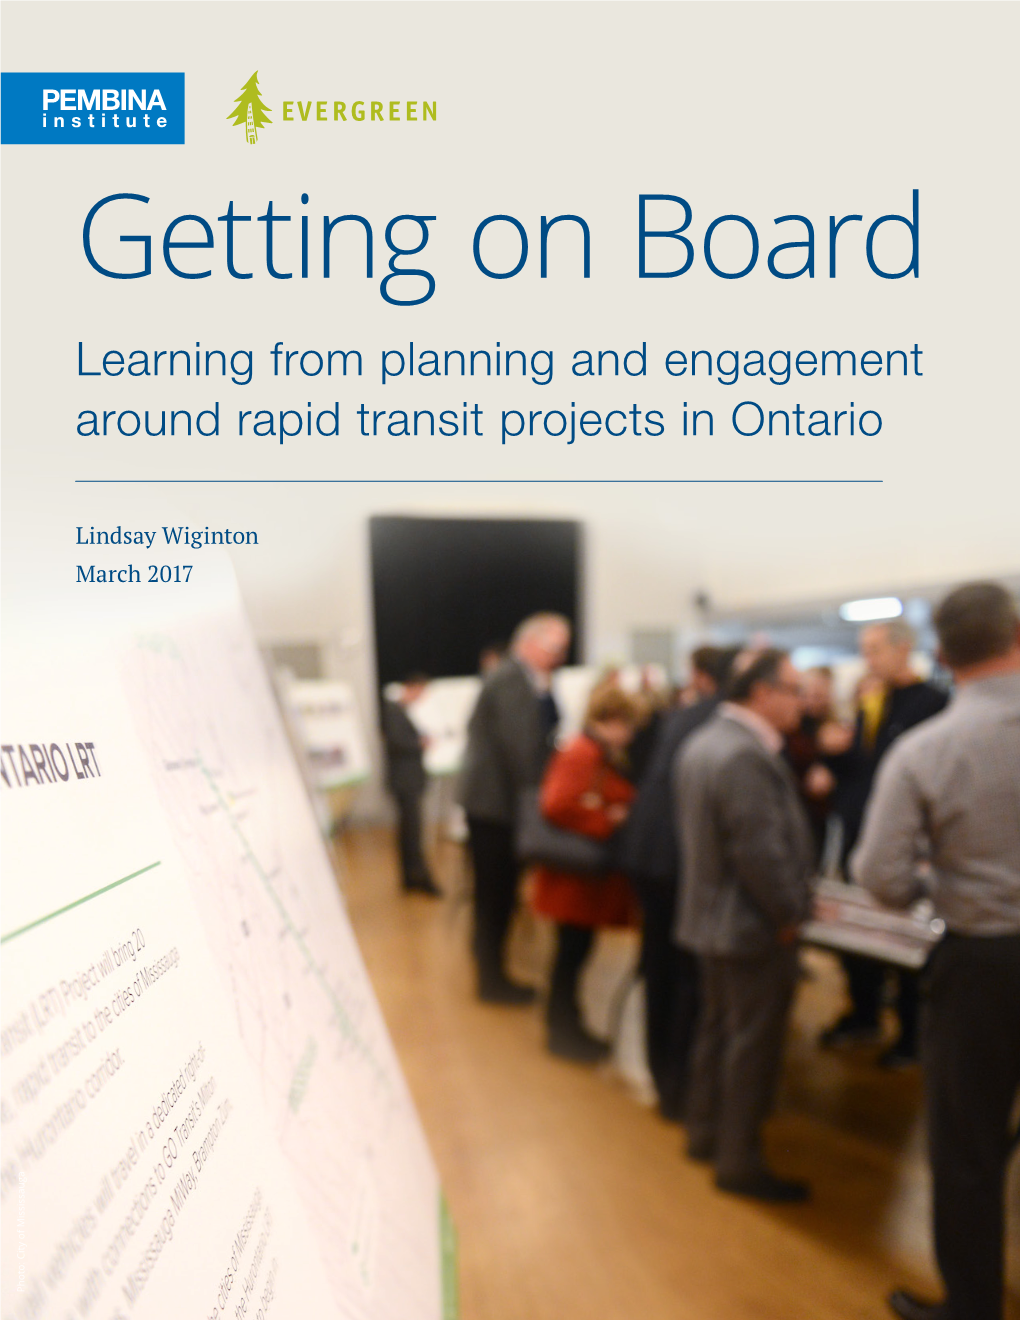 Getting on Board: Learning from Planning and Engagement Around